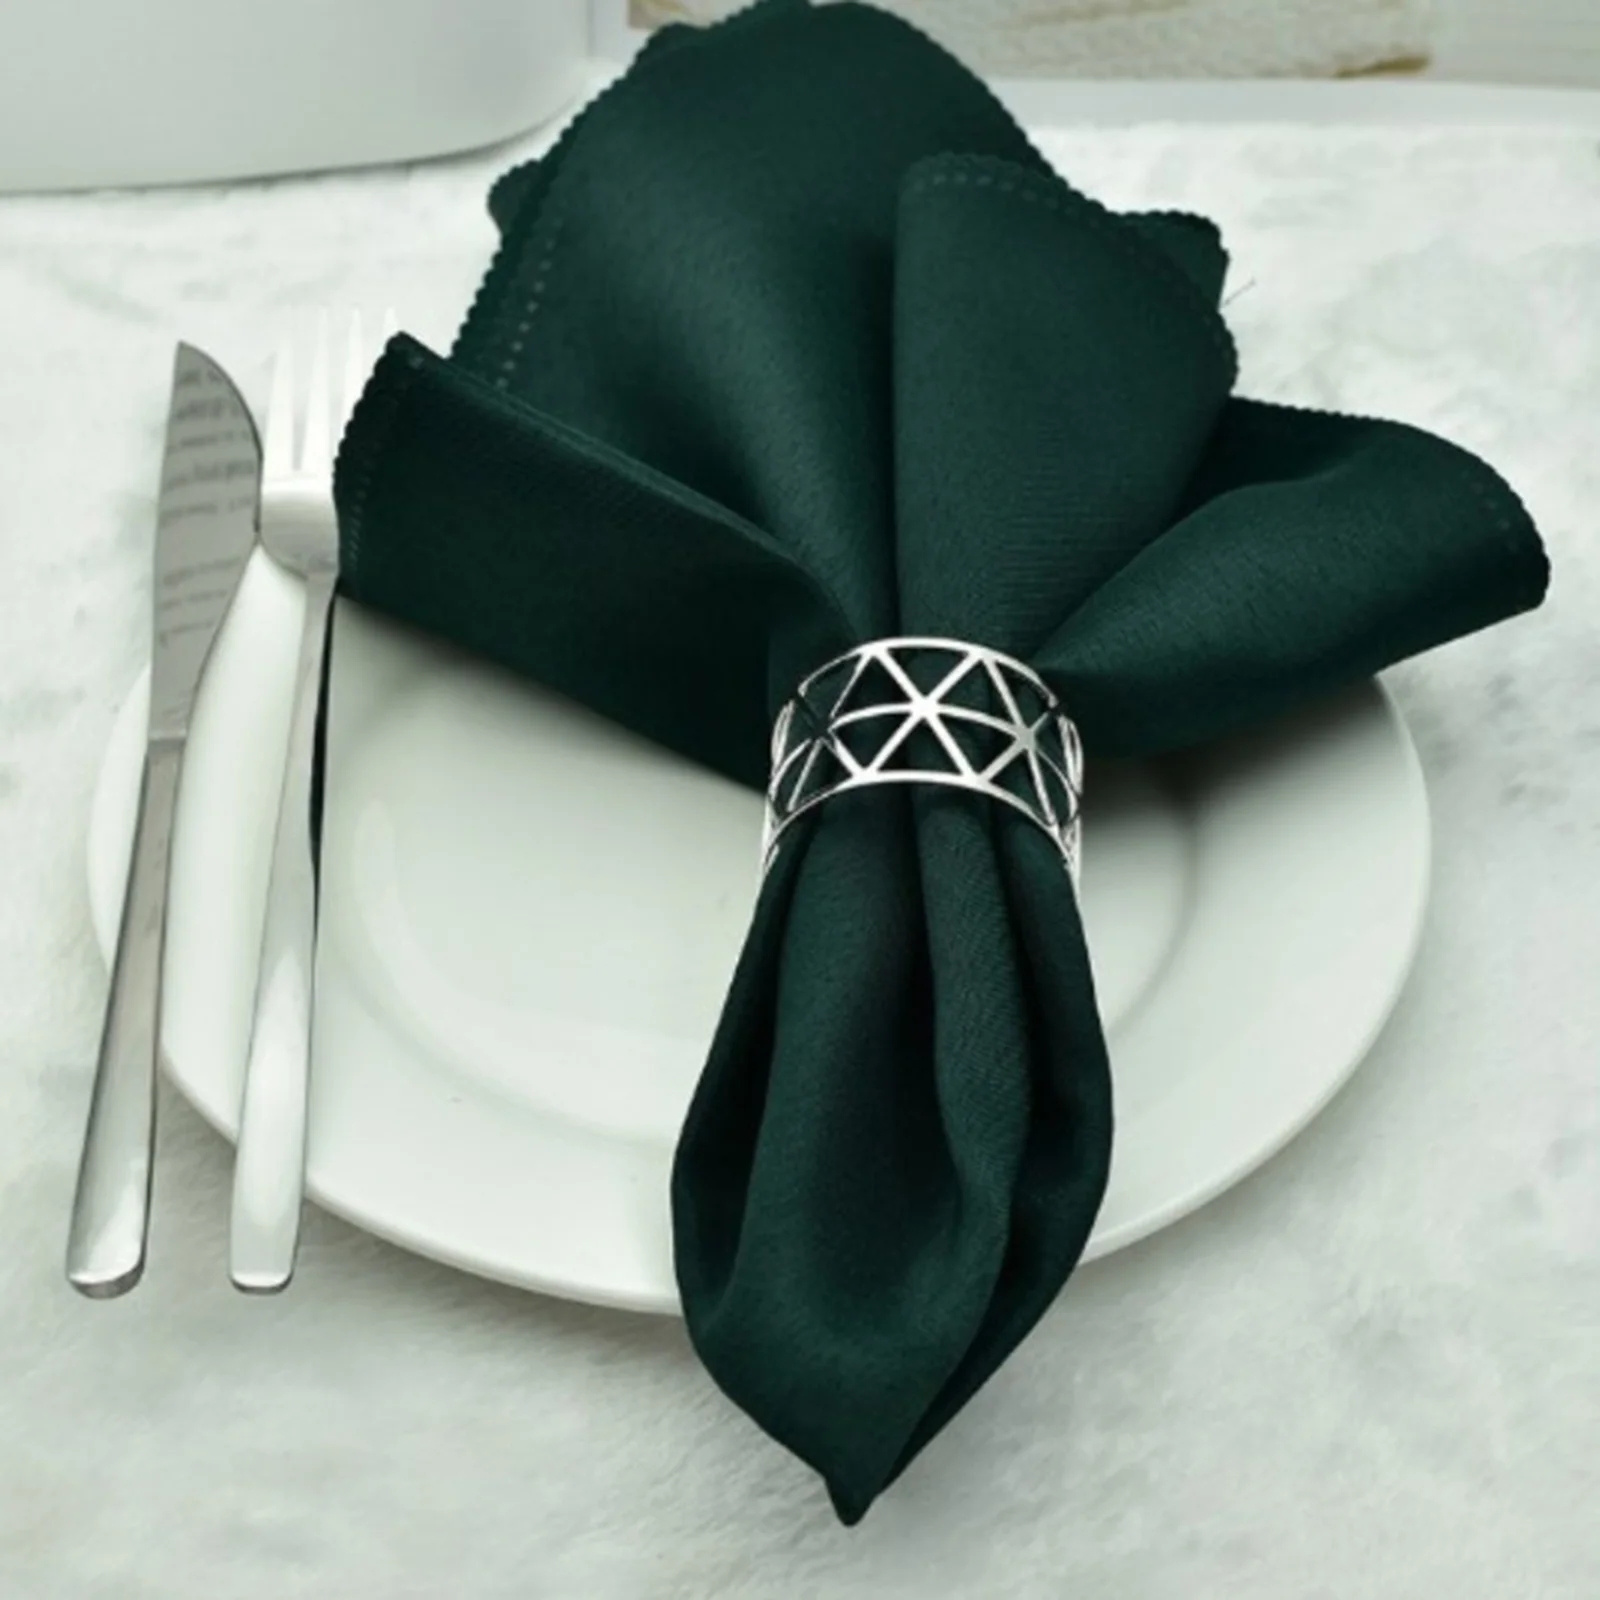 

Geometry Triangle Napkin Rings with Triangular Hollow Out Design for Home Holiday Party Tableware Decorations